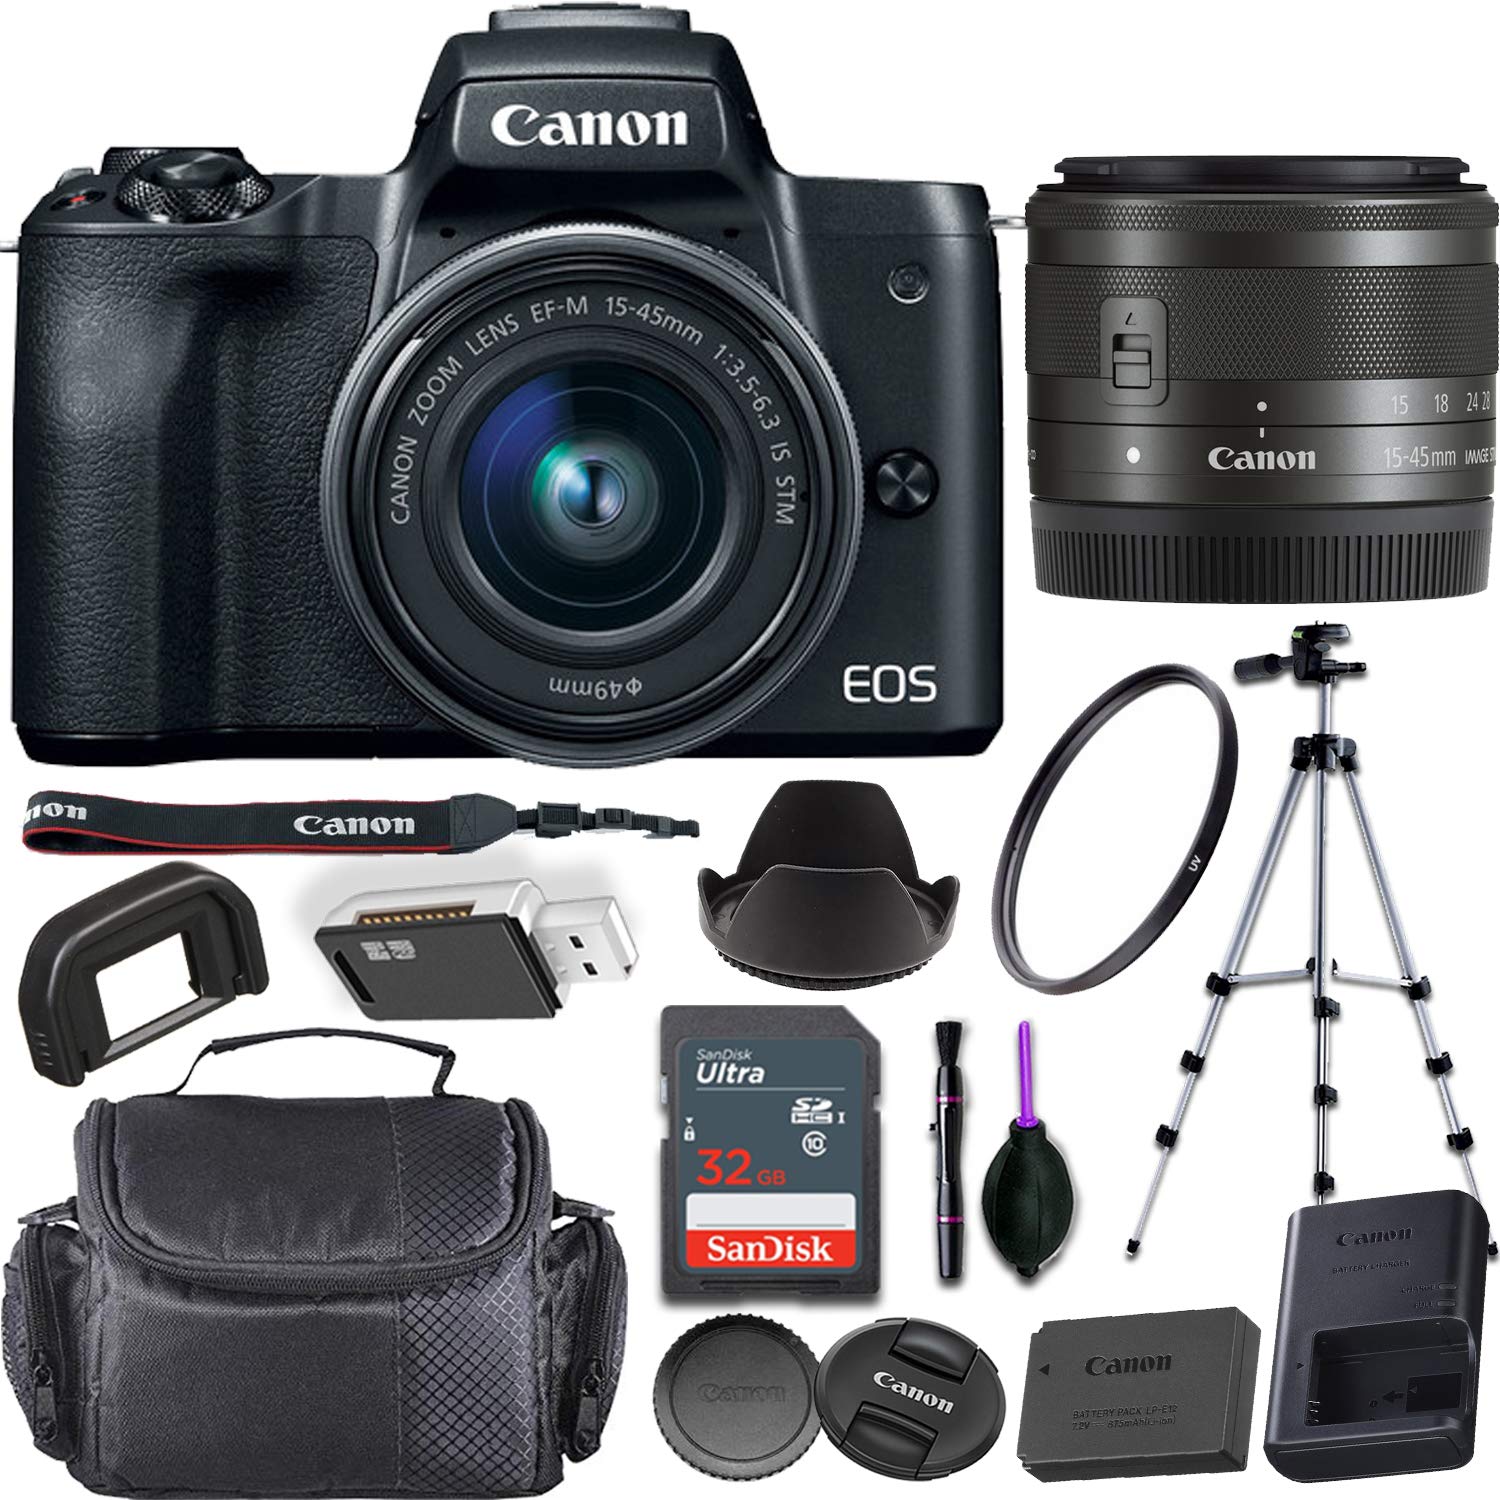 Canon EOS M50 Mirrorless Digital Camera (White) + EF-M 15-45mm f/3.5-6.3 is STM Lens Bundled with Premium Accessories (32GB Memory Card, Padded Equ...